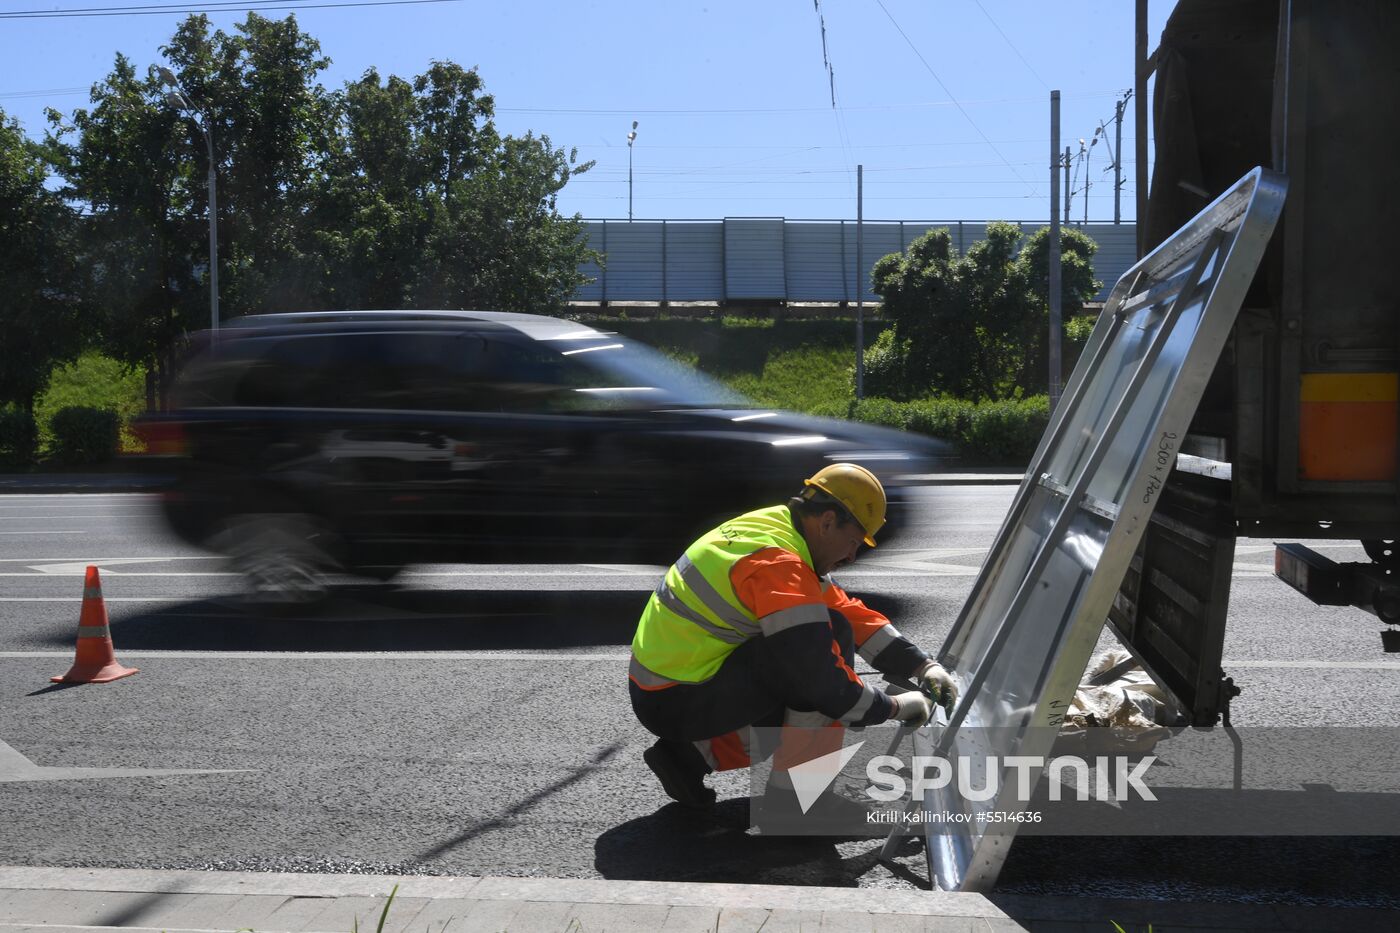 Installing street signs for 2018 FIFA World Cup